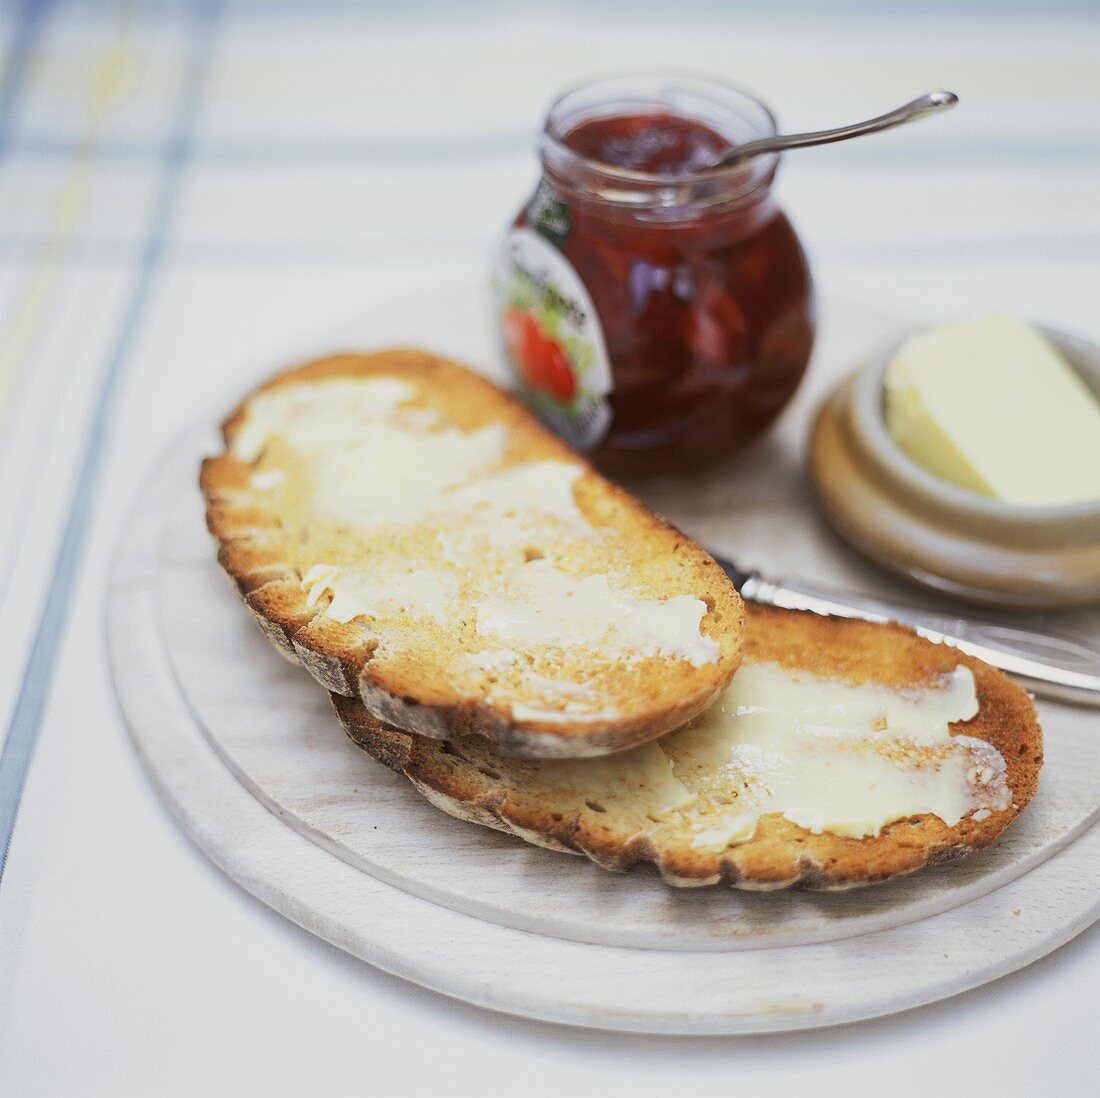 Toasted bread with butter, with jam jar behind